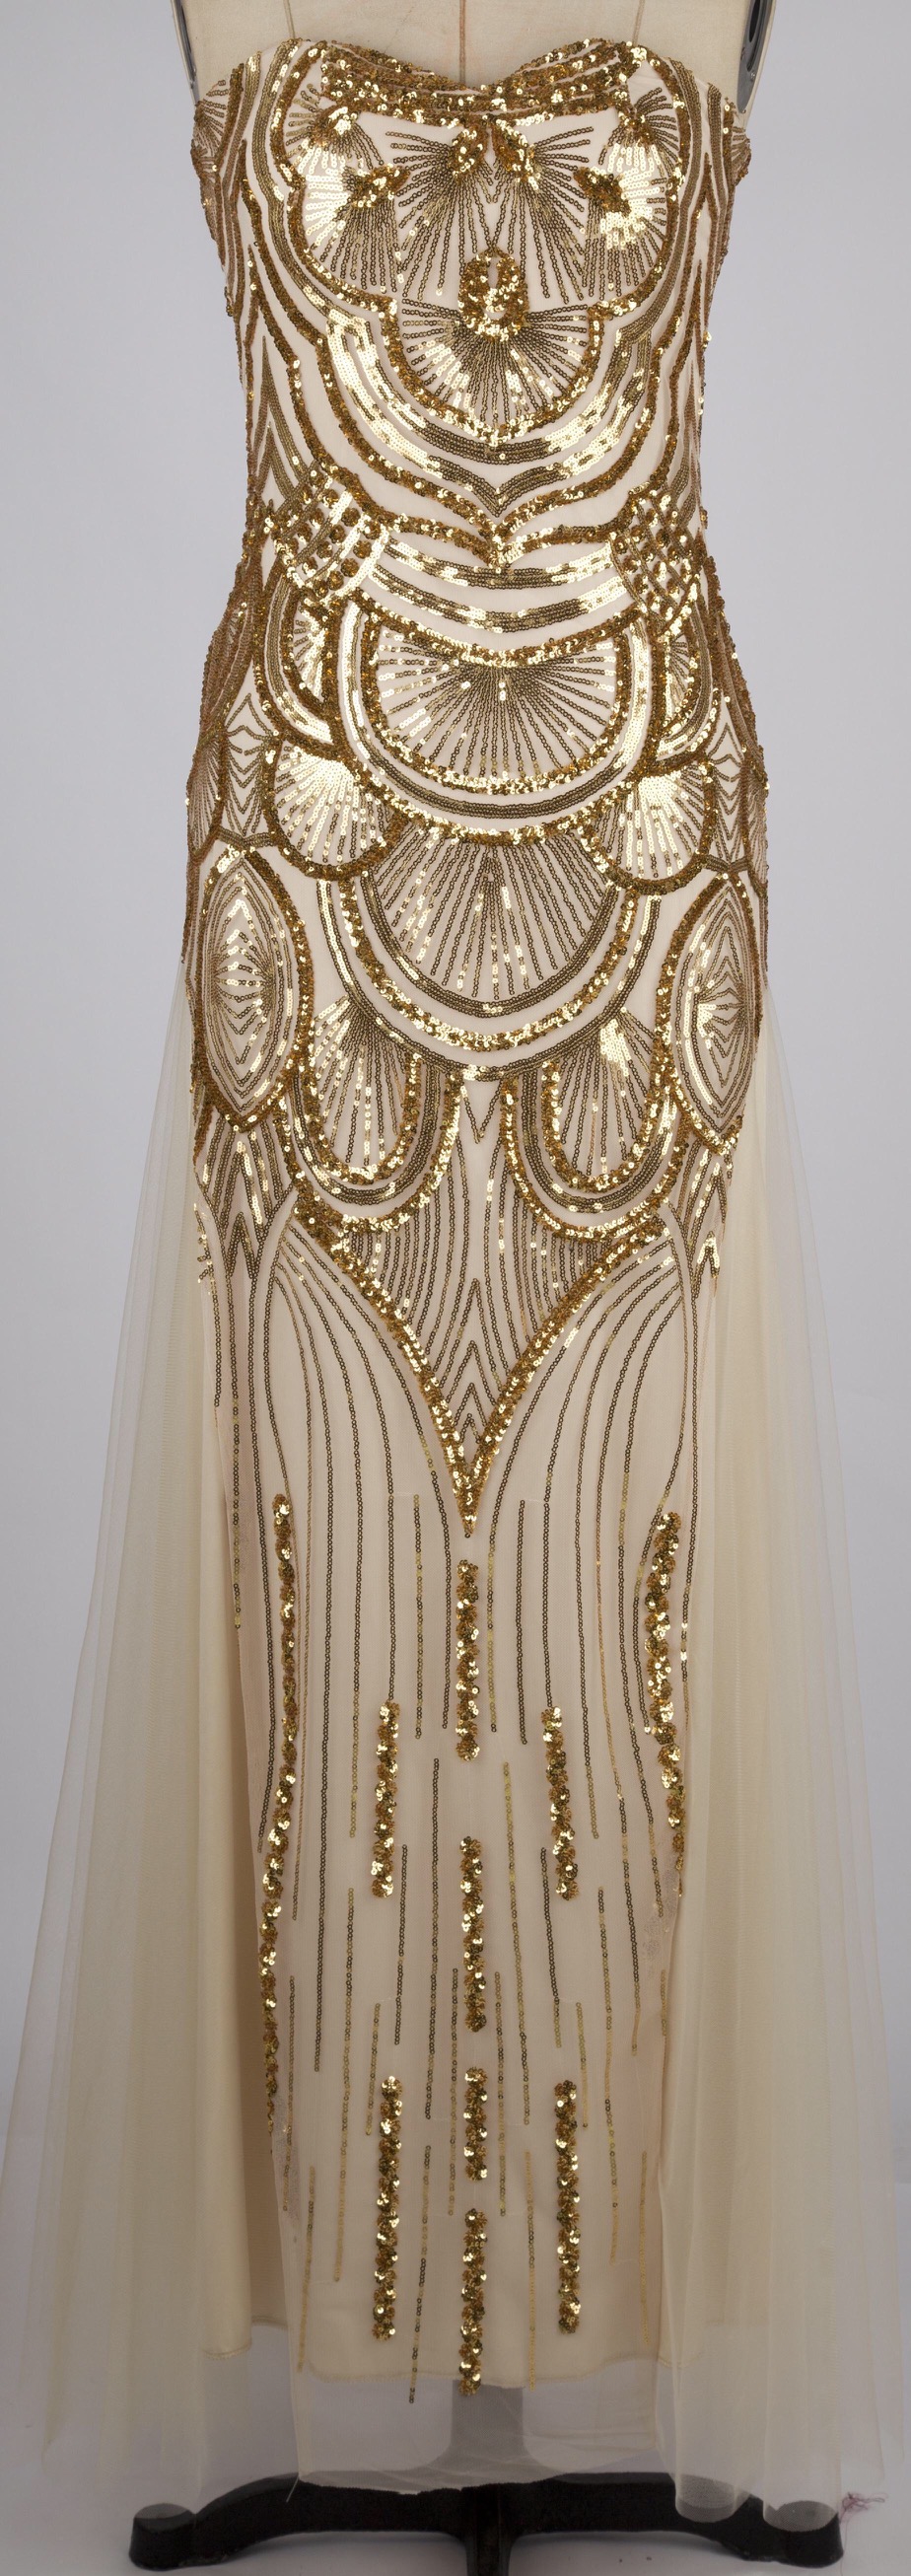 Pageant dress gold